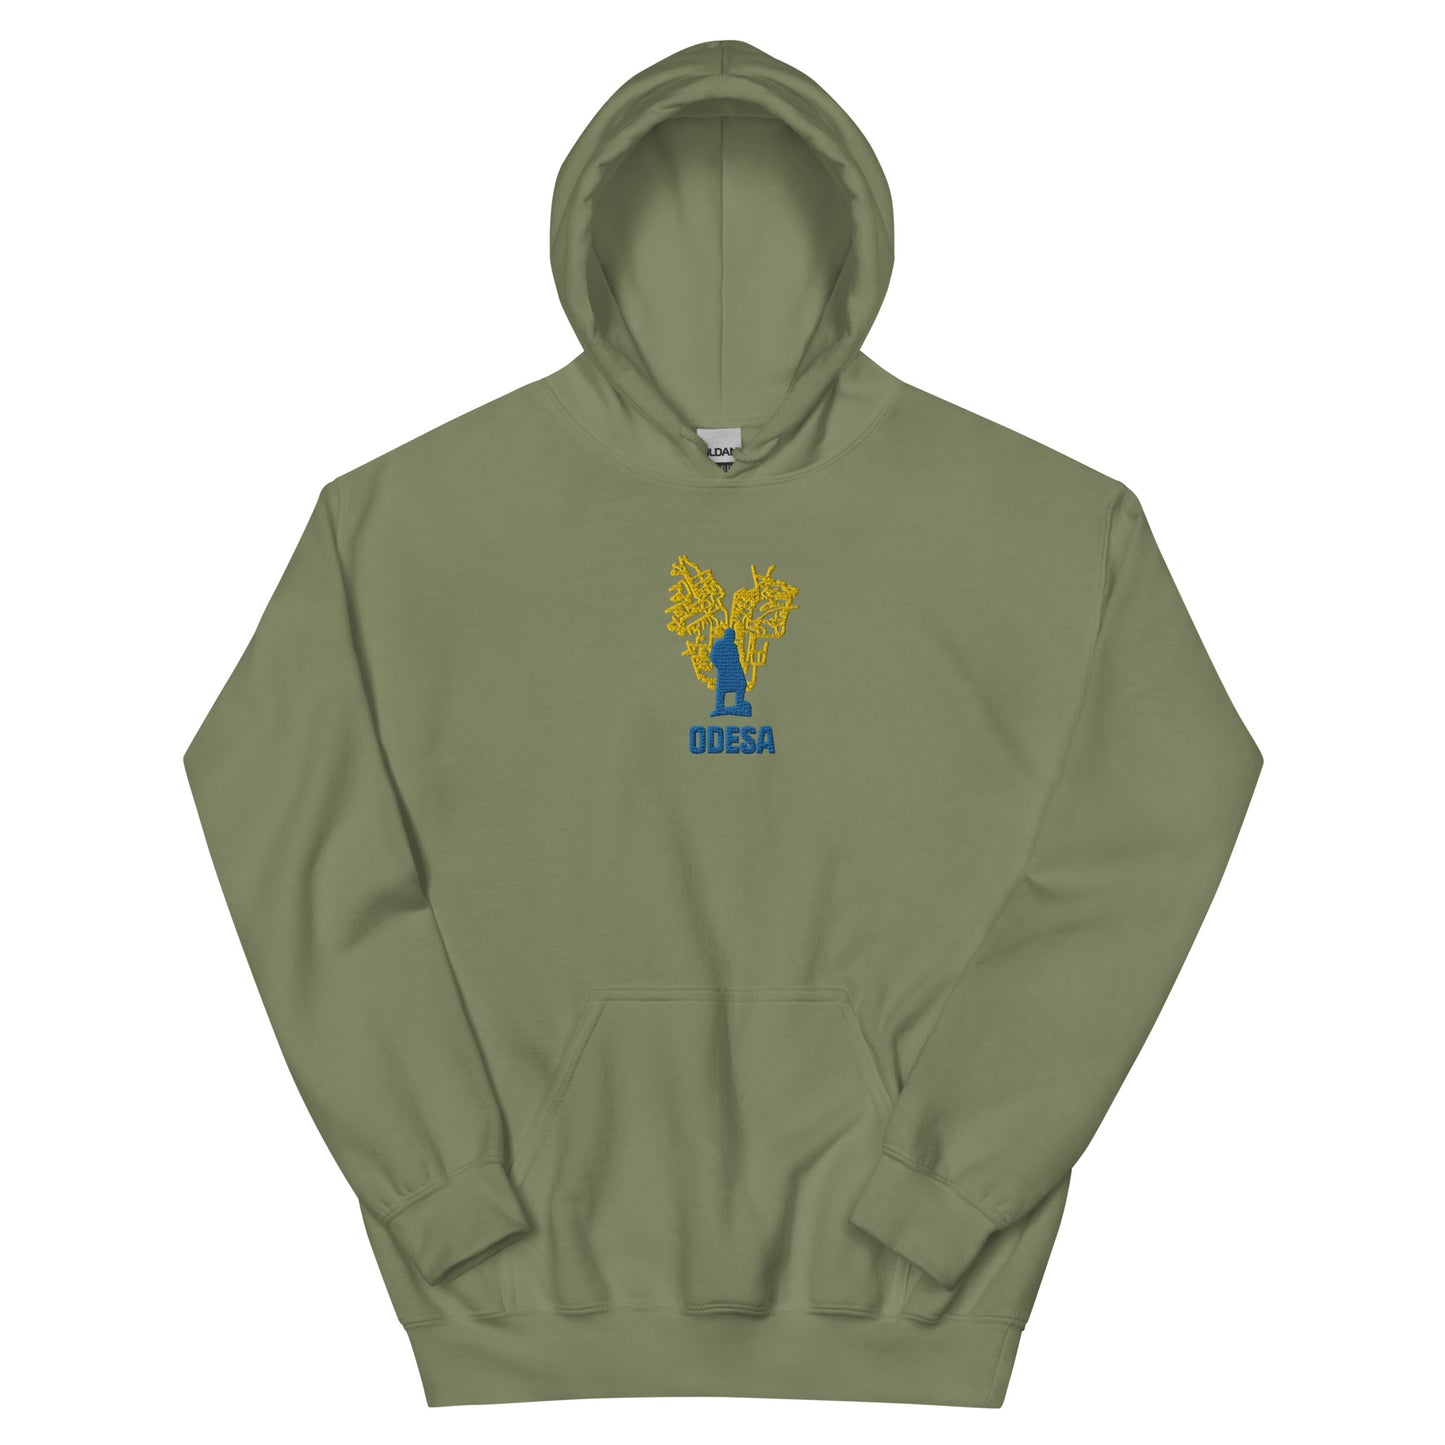 2 Years of Resistance Embroidered Hoodie Odesa